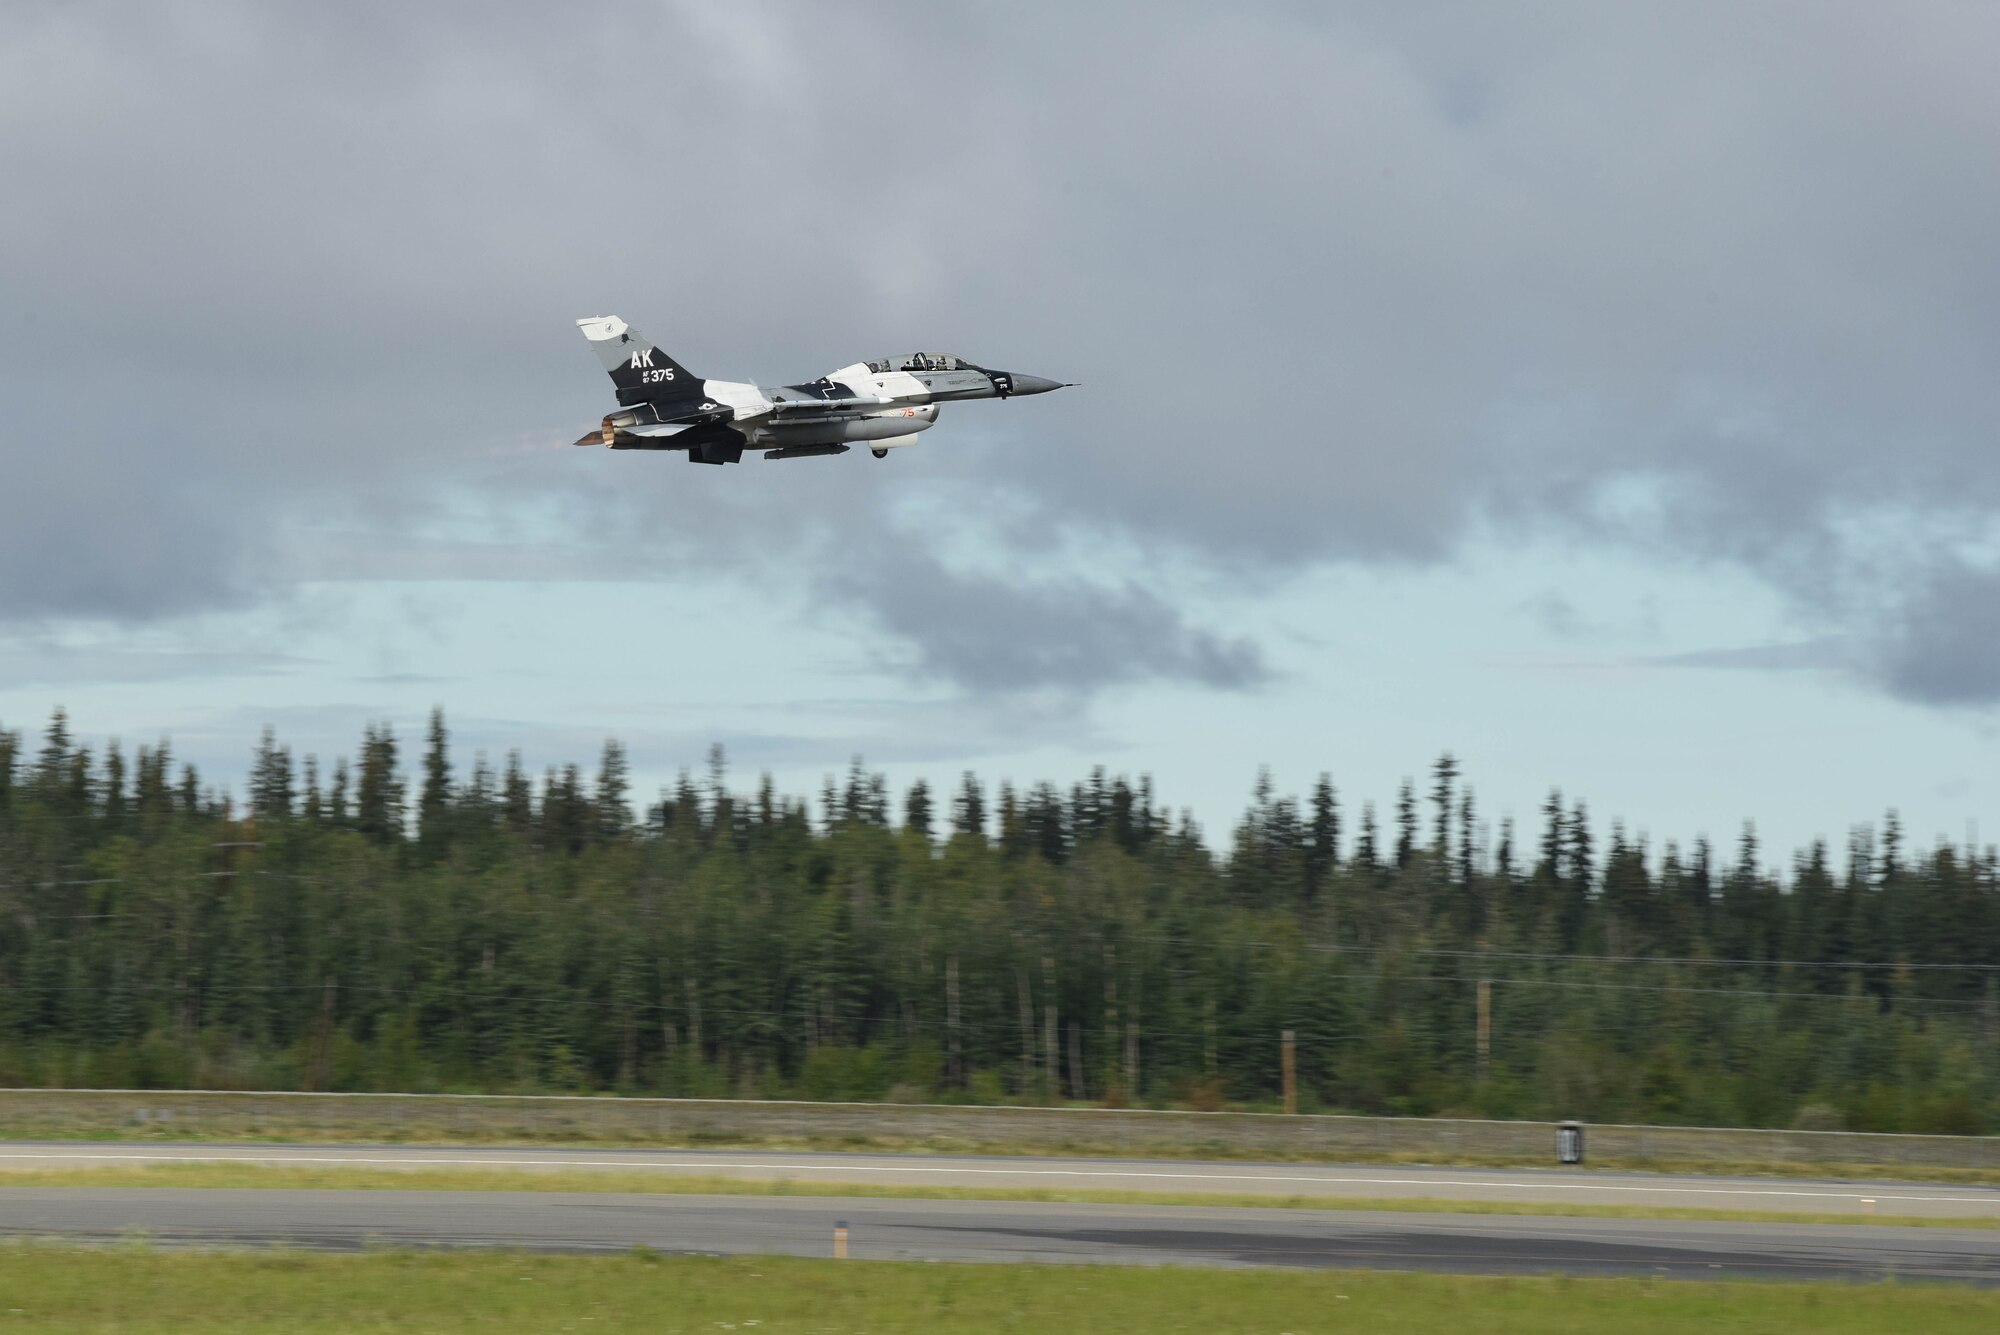 The flight provided an opportunity to showcase the 354th Fighter Wing’s mission and the value of the Joint Pacific Alaska Range Complex.